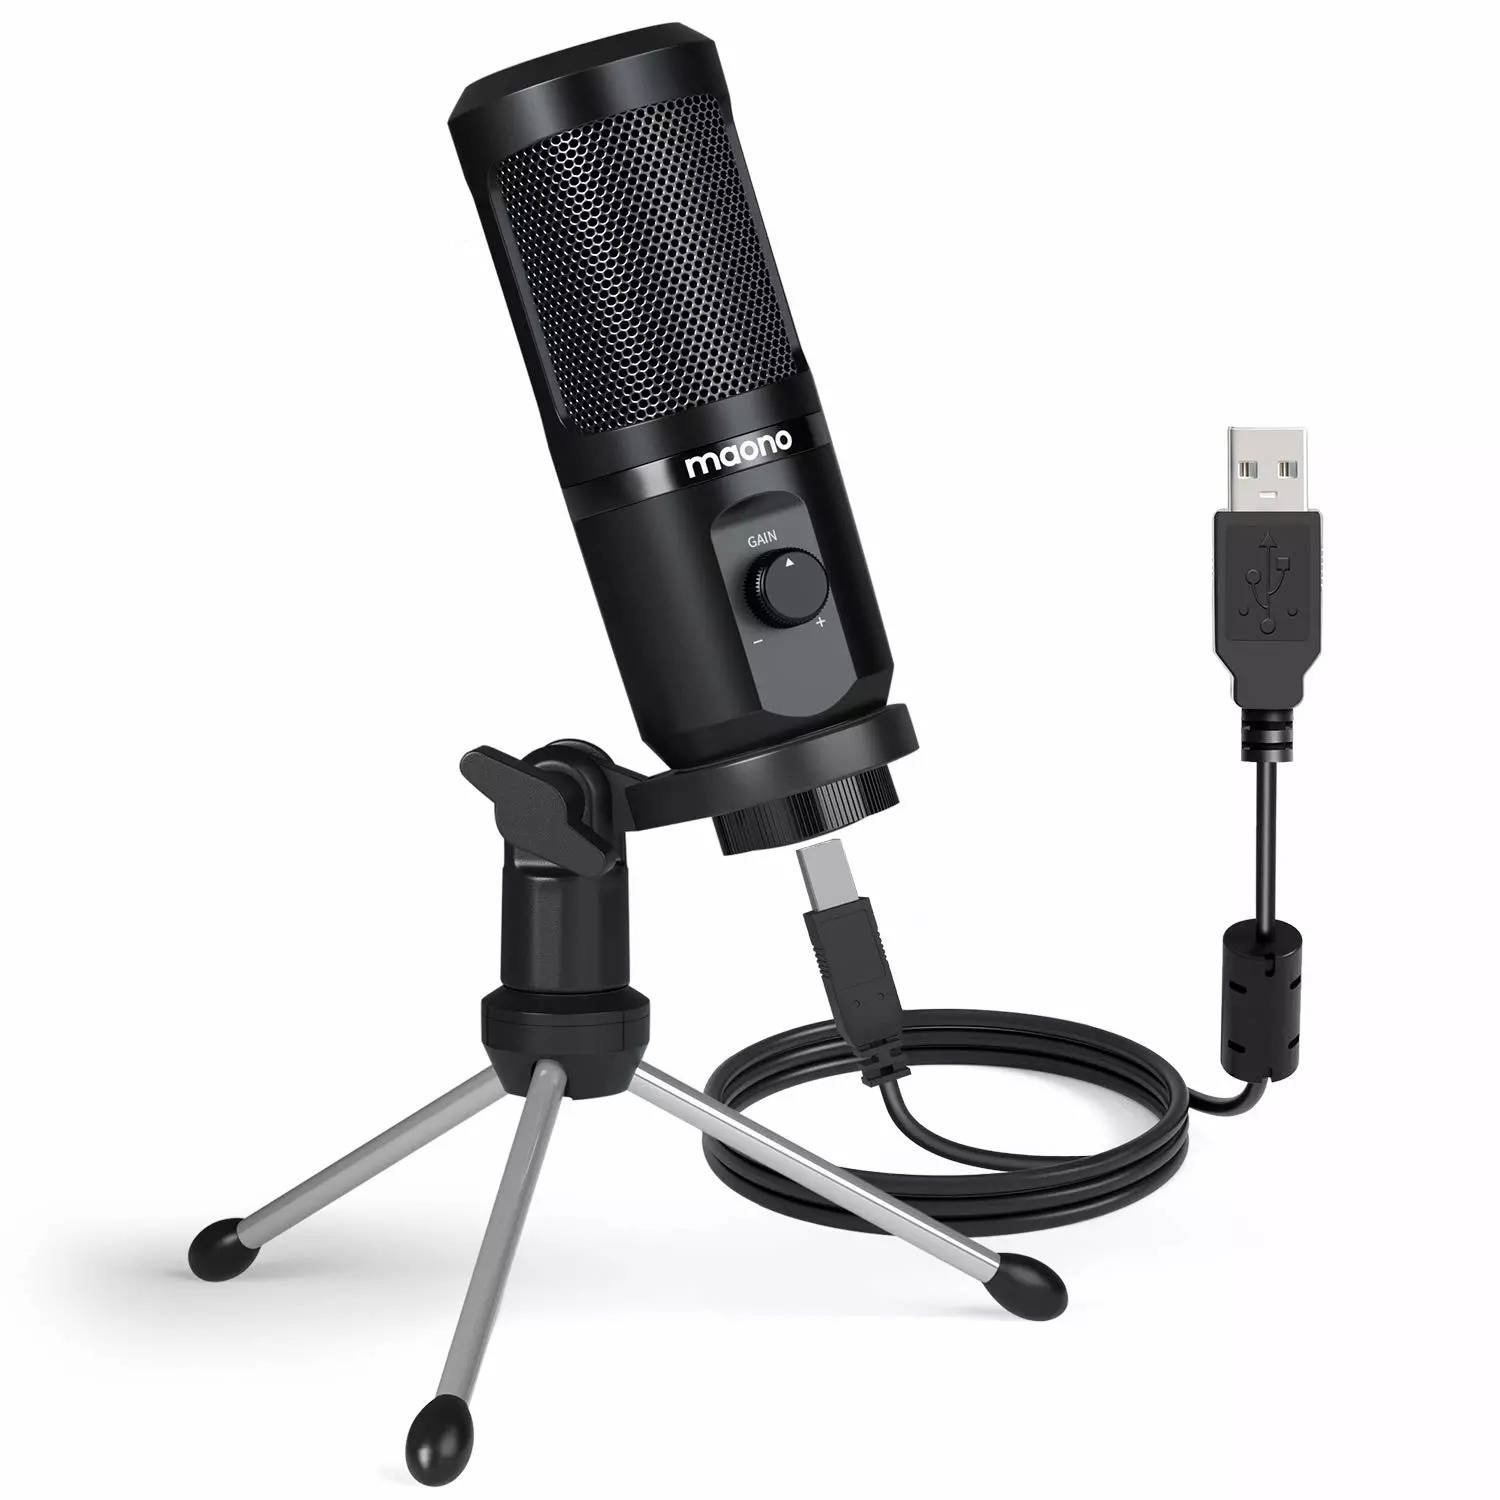 FIFINE USB Podcast Condenser Microphone Recording On Laptop, No